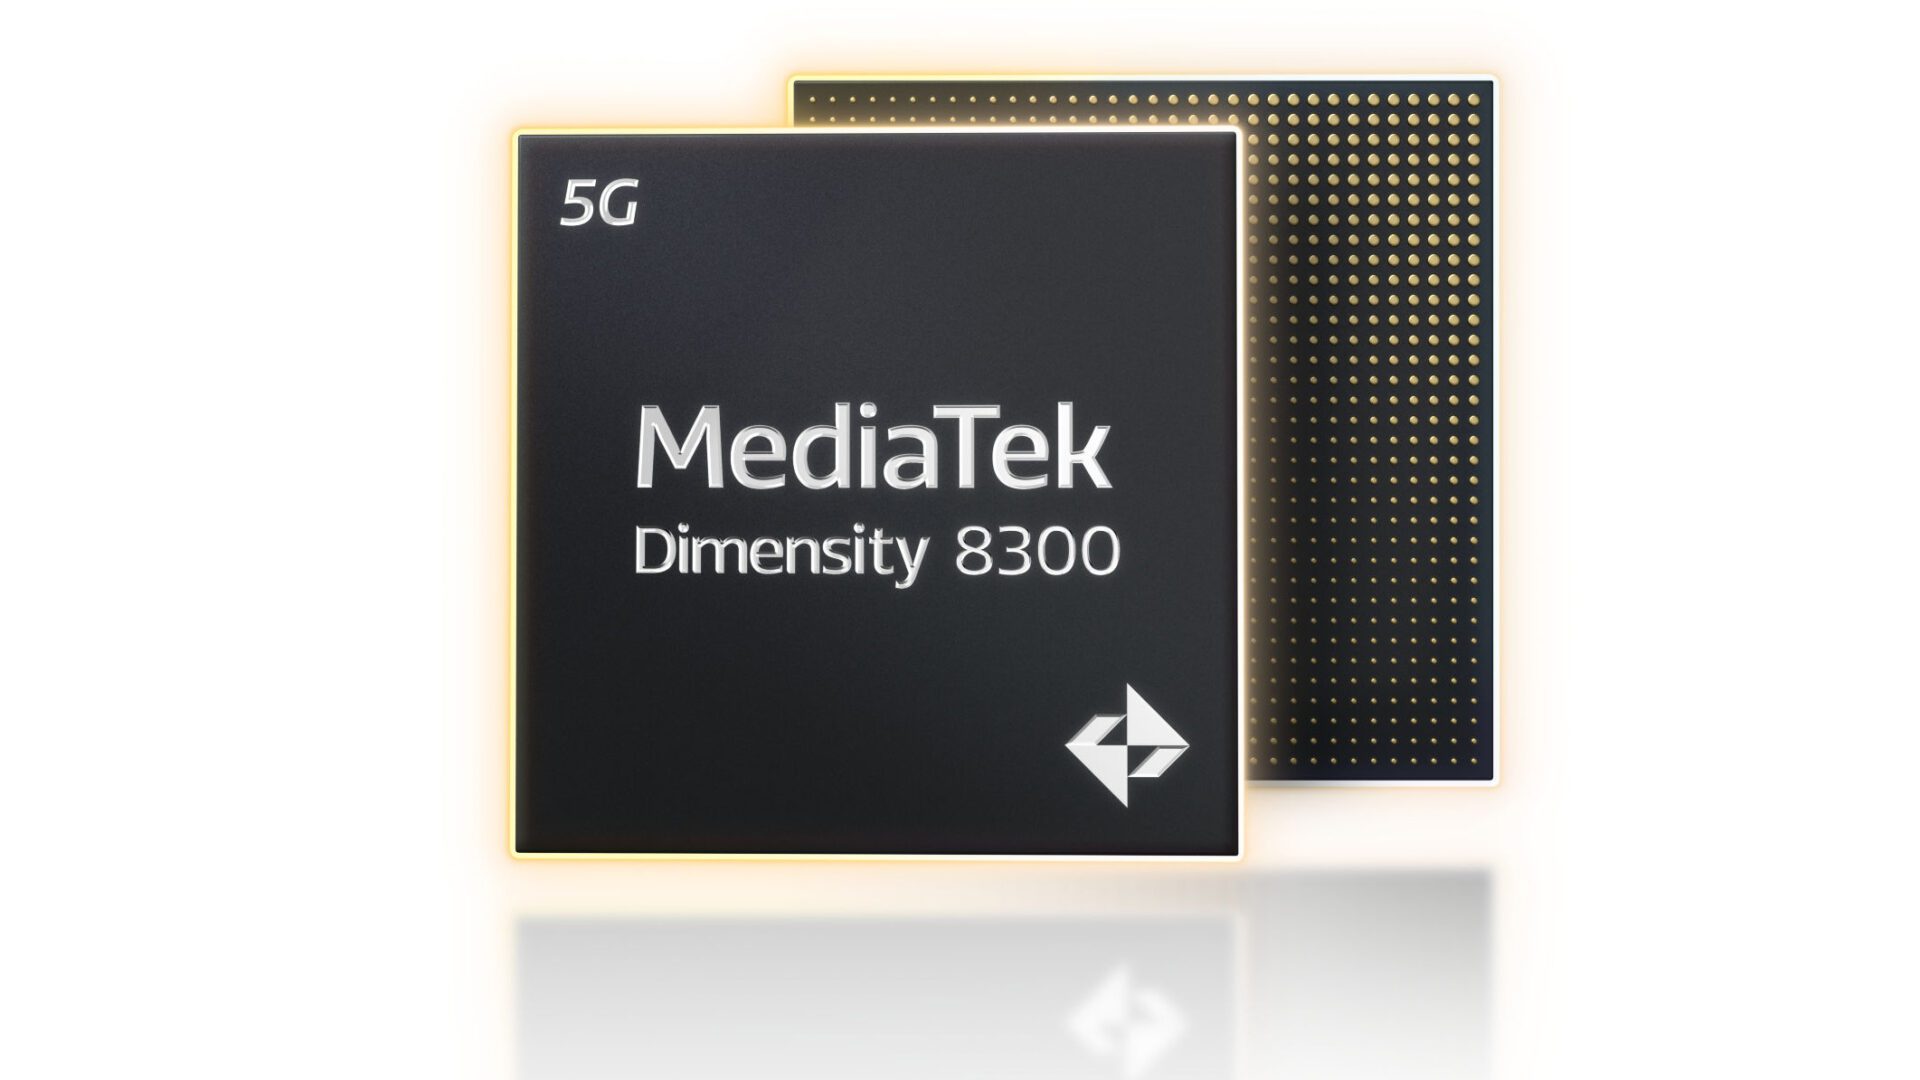 Dimensity 8300 introduced, with a 60% faster GPU